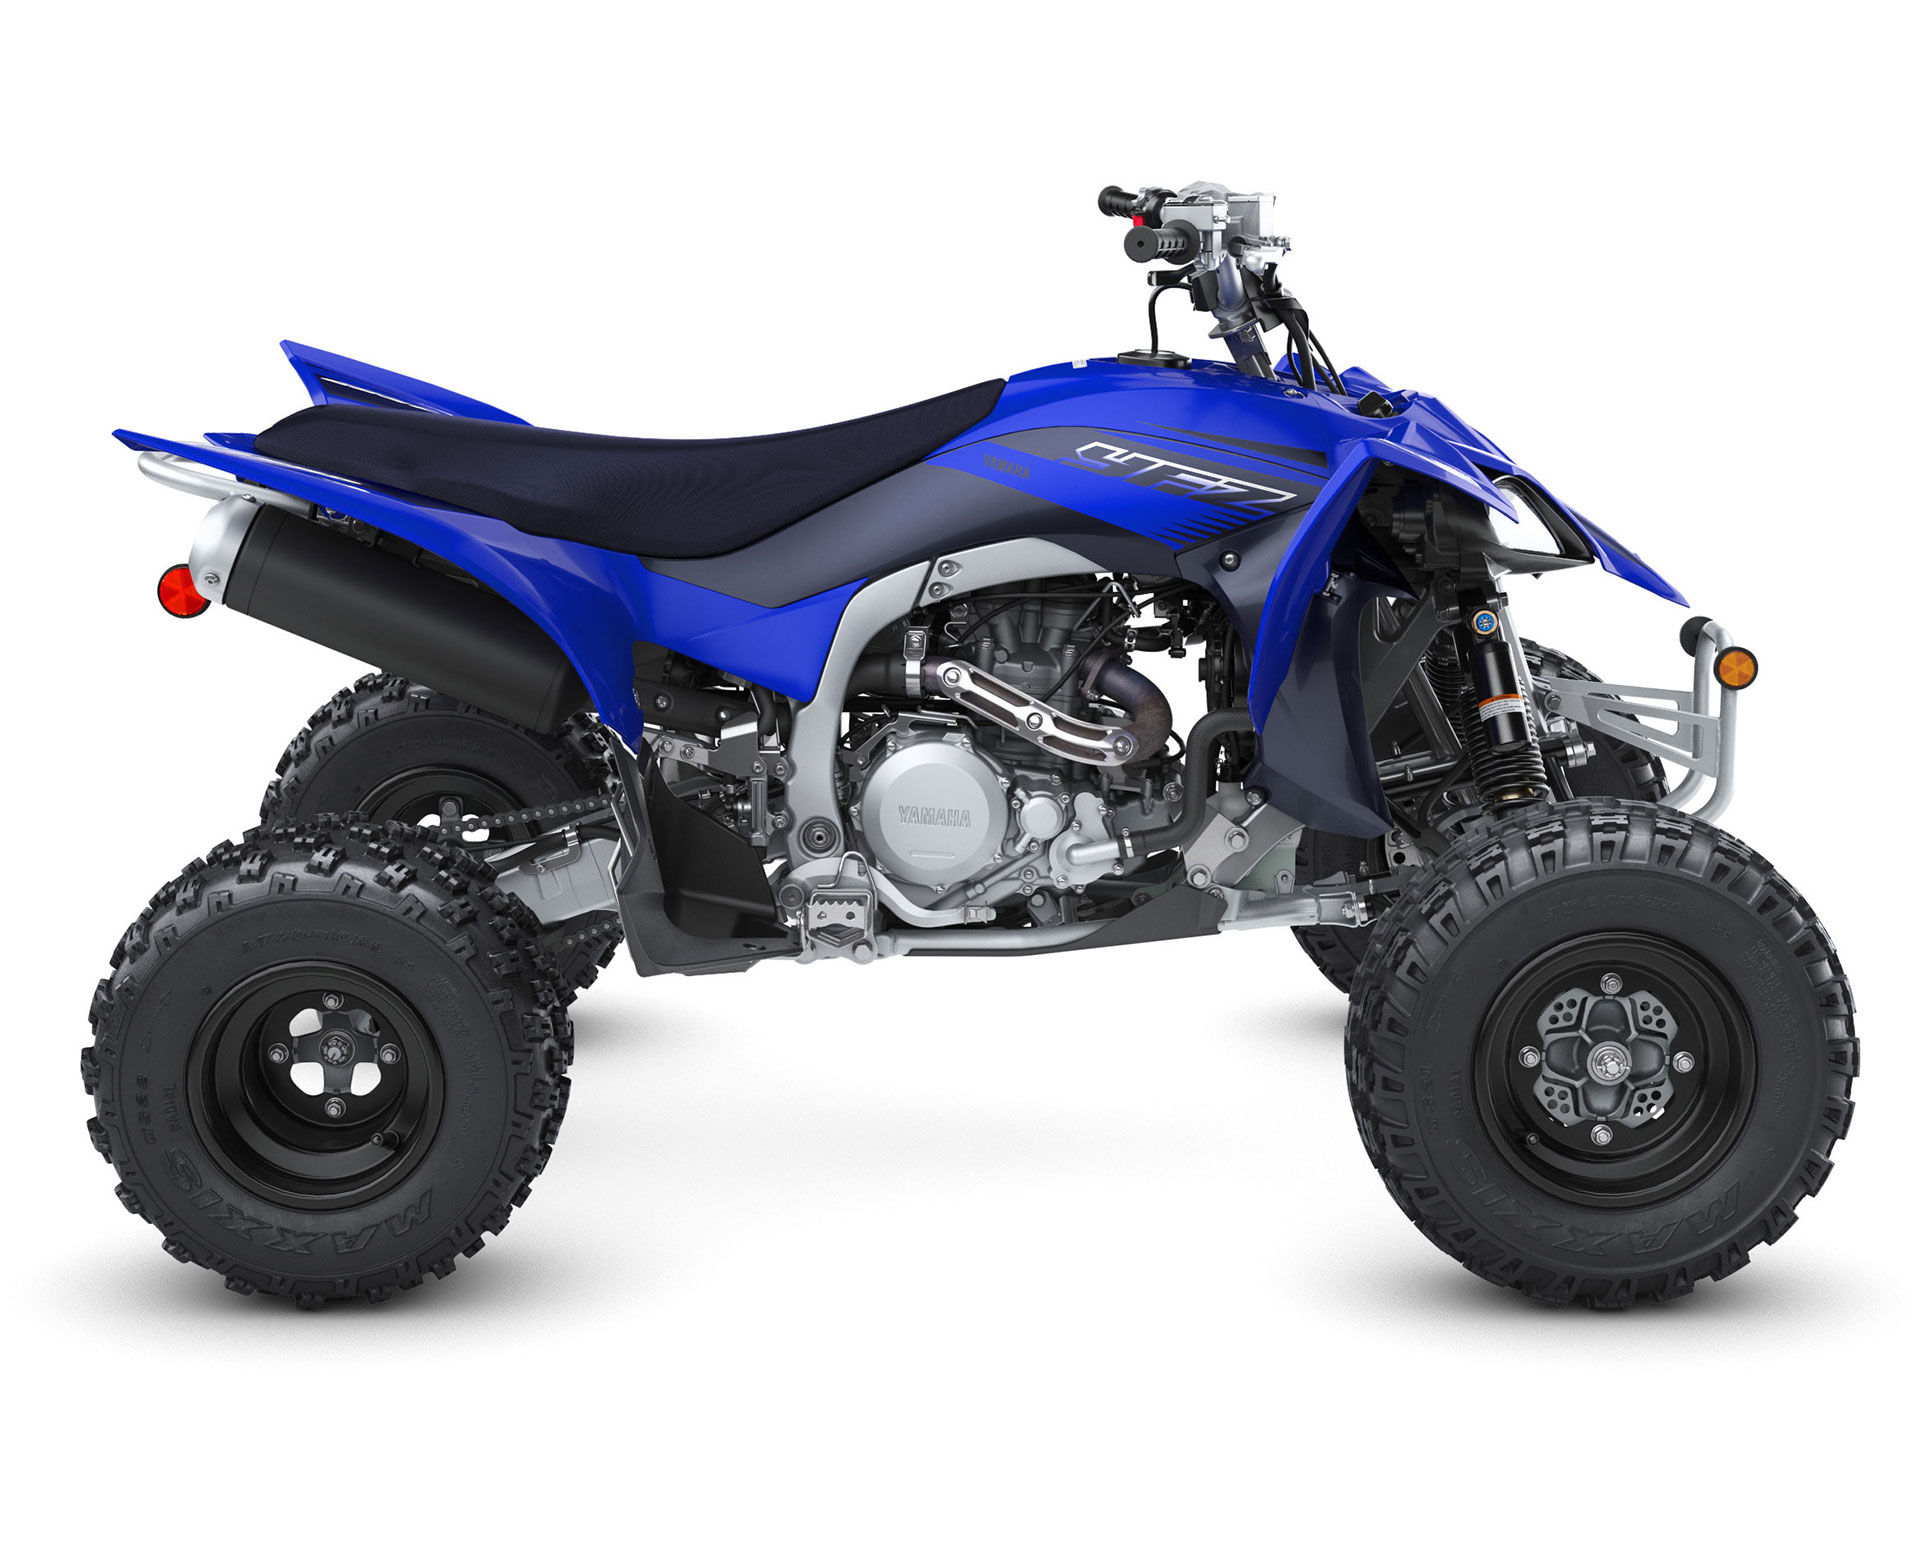 Thumbnail of your customized 2023 YFZ450R